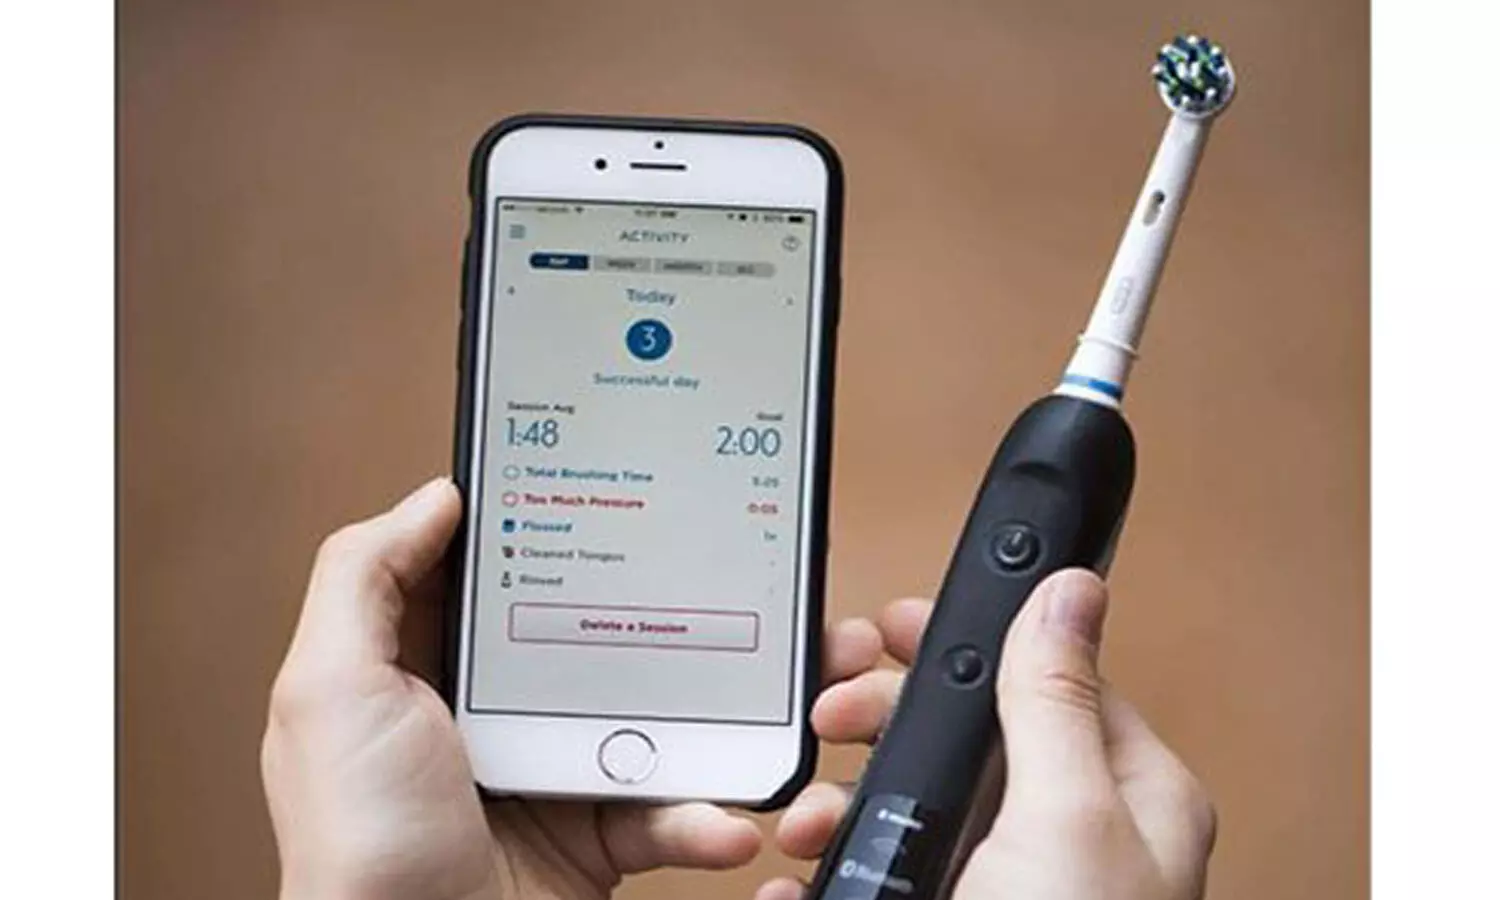 Check out the Smart Toothbrush by Oral-B